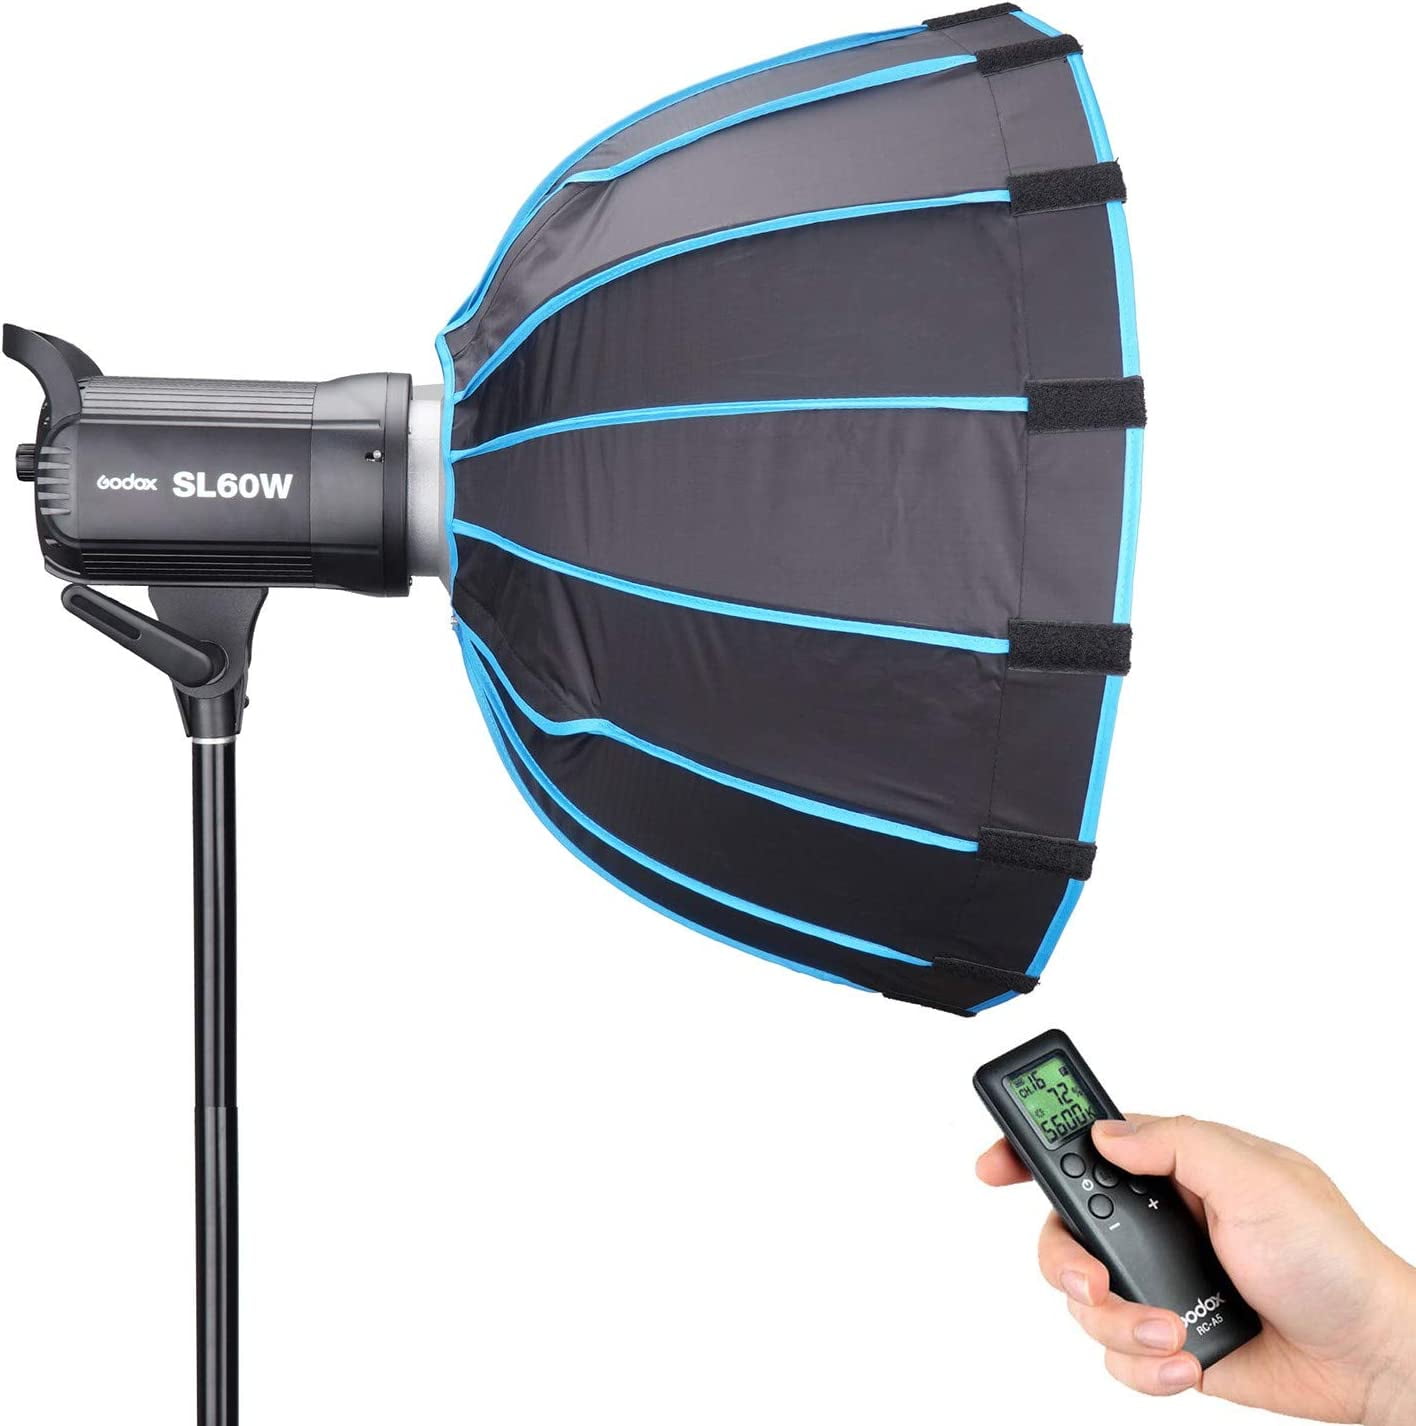 Godox SL60W Kit with Soft Box Softbox 5600K Studio Continuous LED Video  Light Lamp 5600K Bowens Mount for Video Recording 